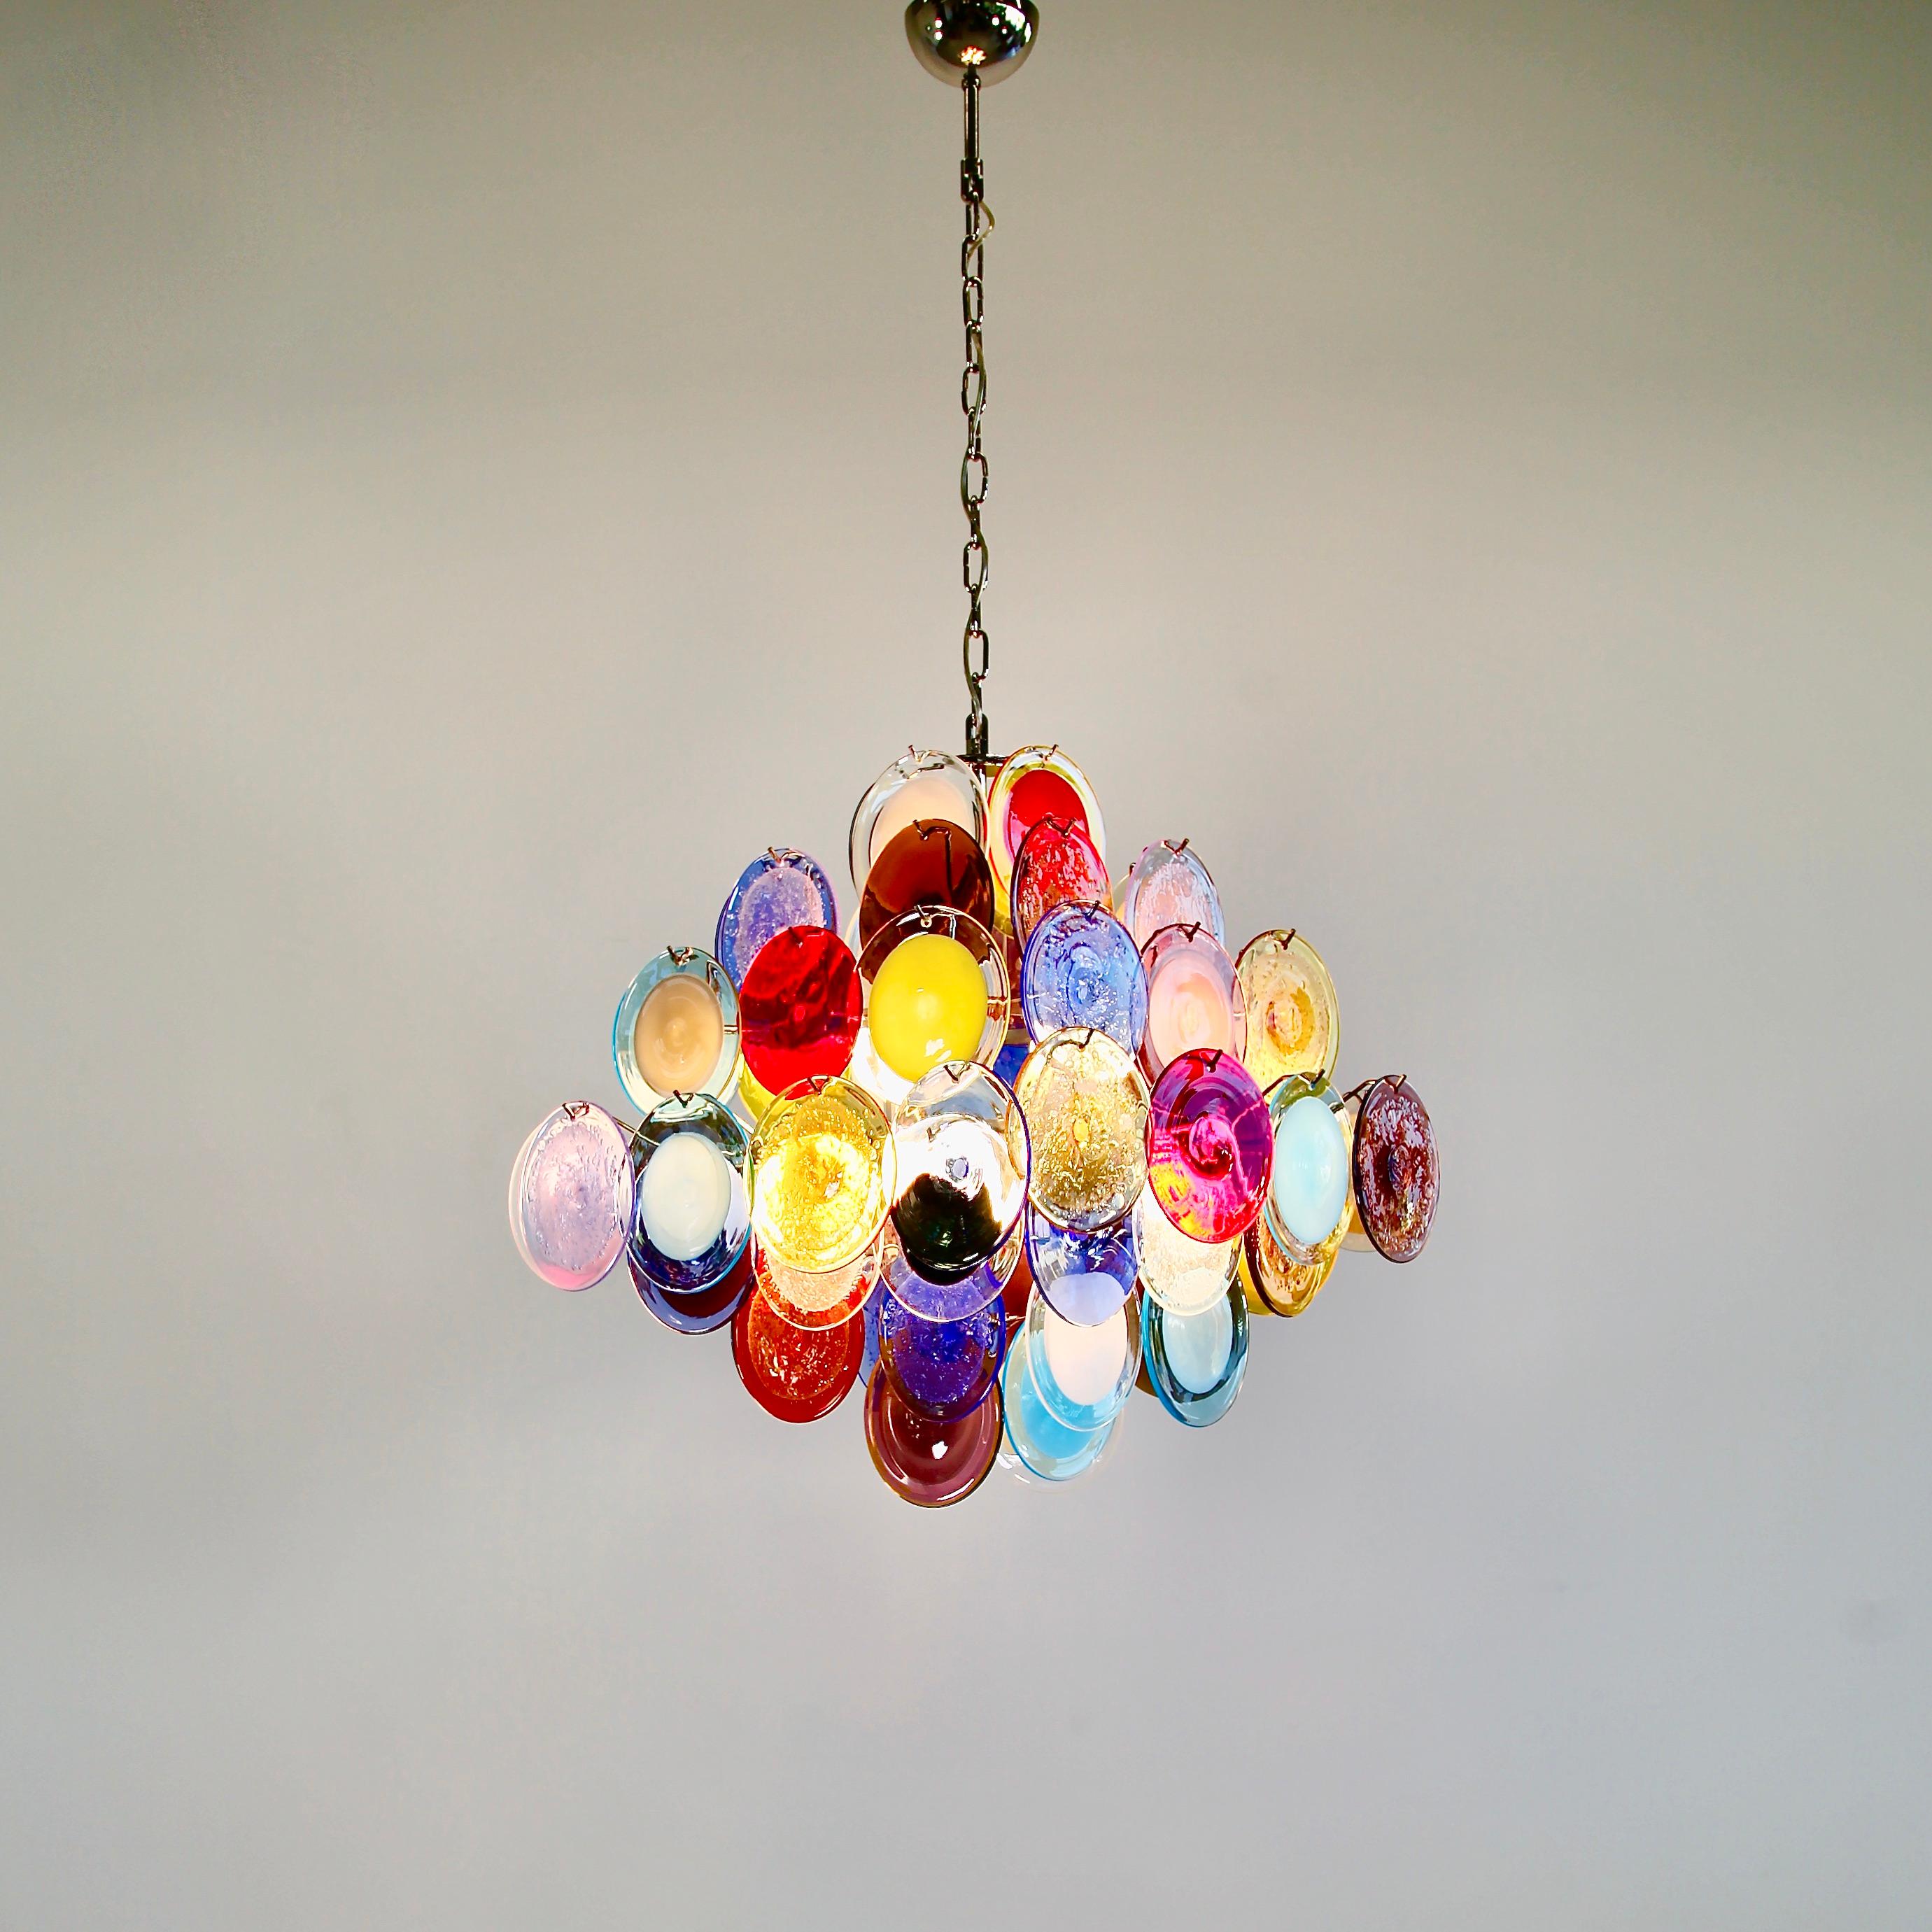 Large glass disk chandelier. Italy, Murano.

Chandelier with multicolored glass disks, hand blown in Murano. Metal frame with ten light sockets.